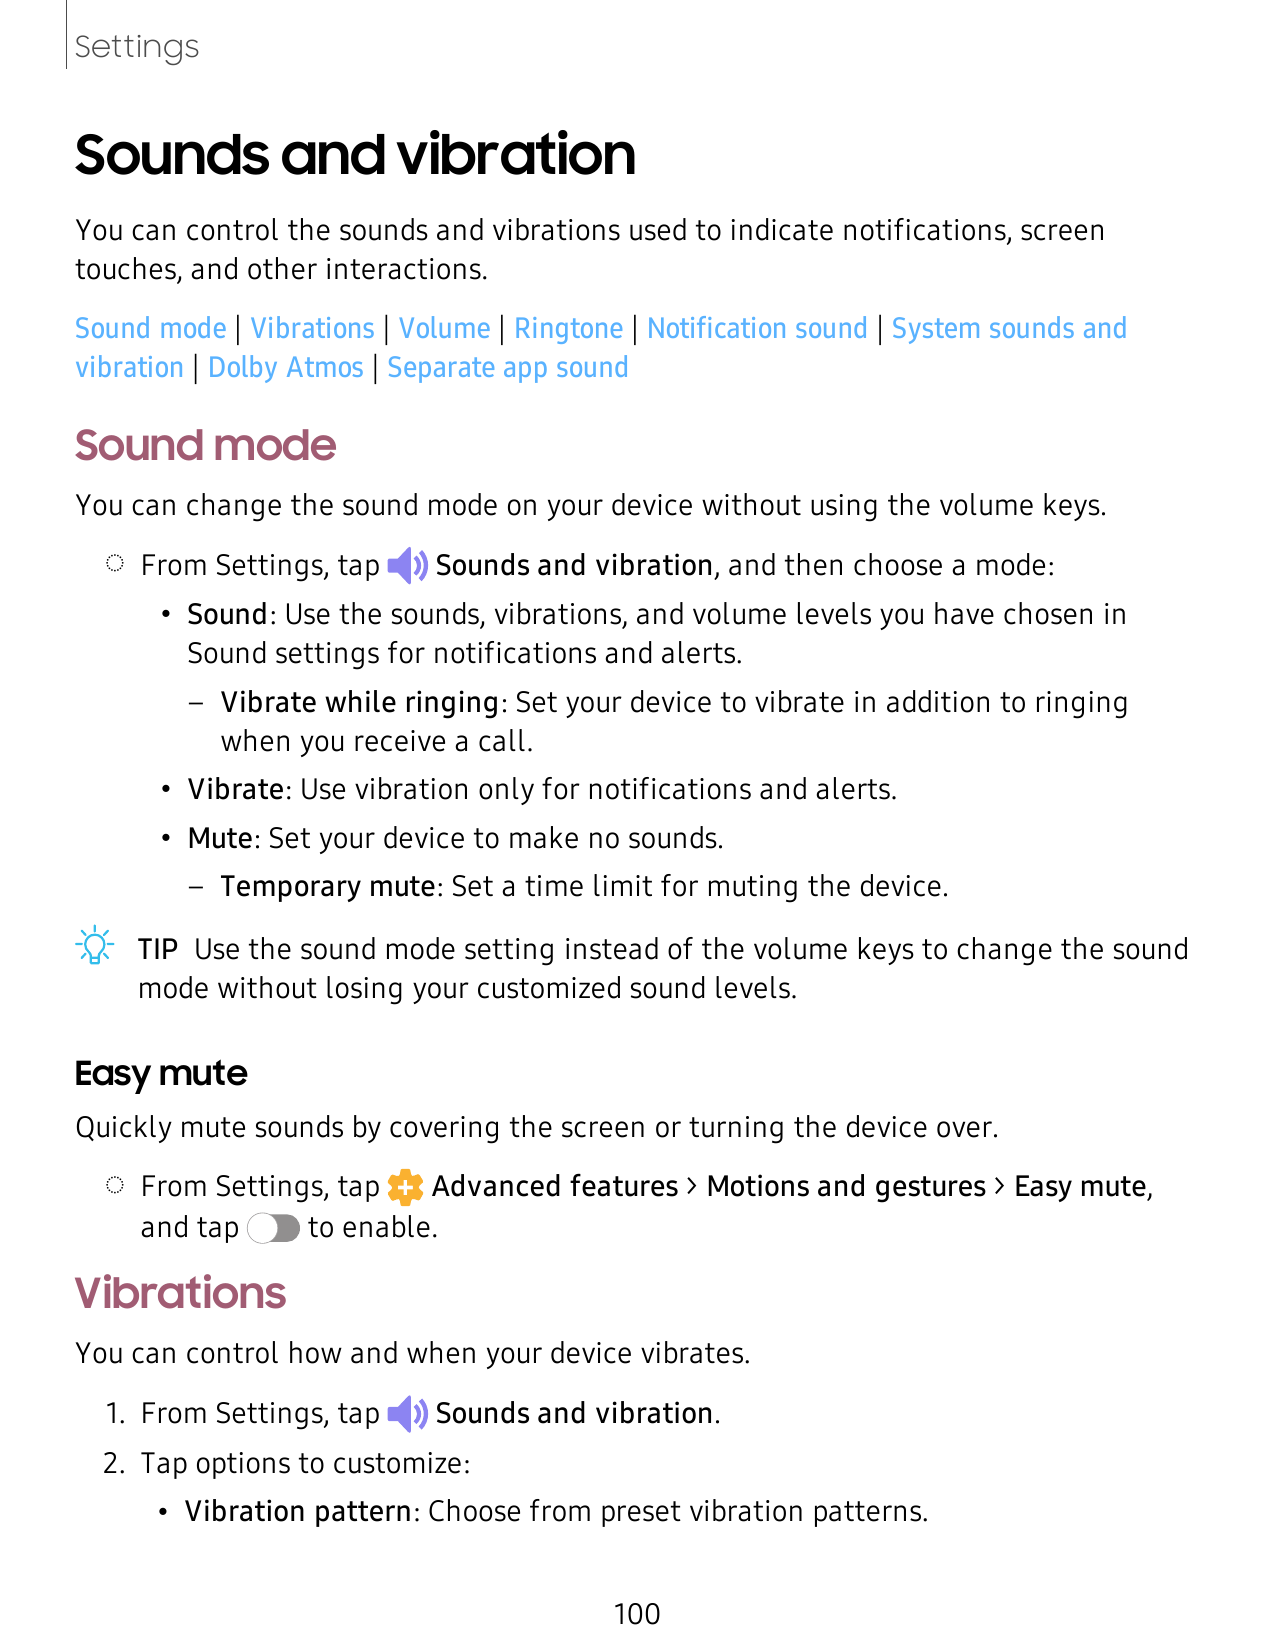 SettingsSounds and vibrationYou can control the sounds and vibrations used to indicate notifications, screentouches, and other i